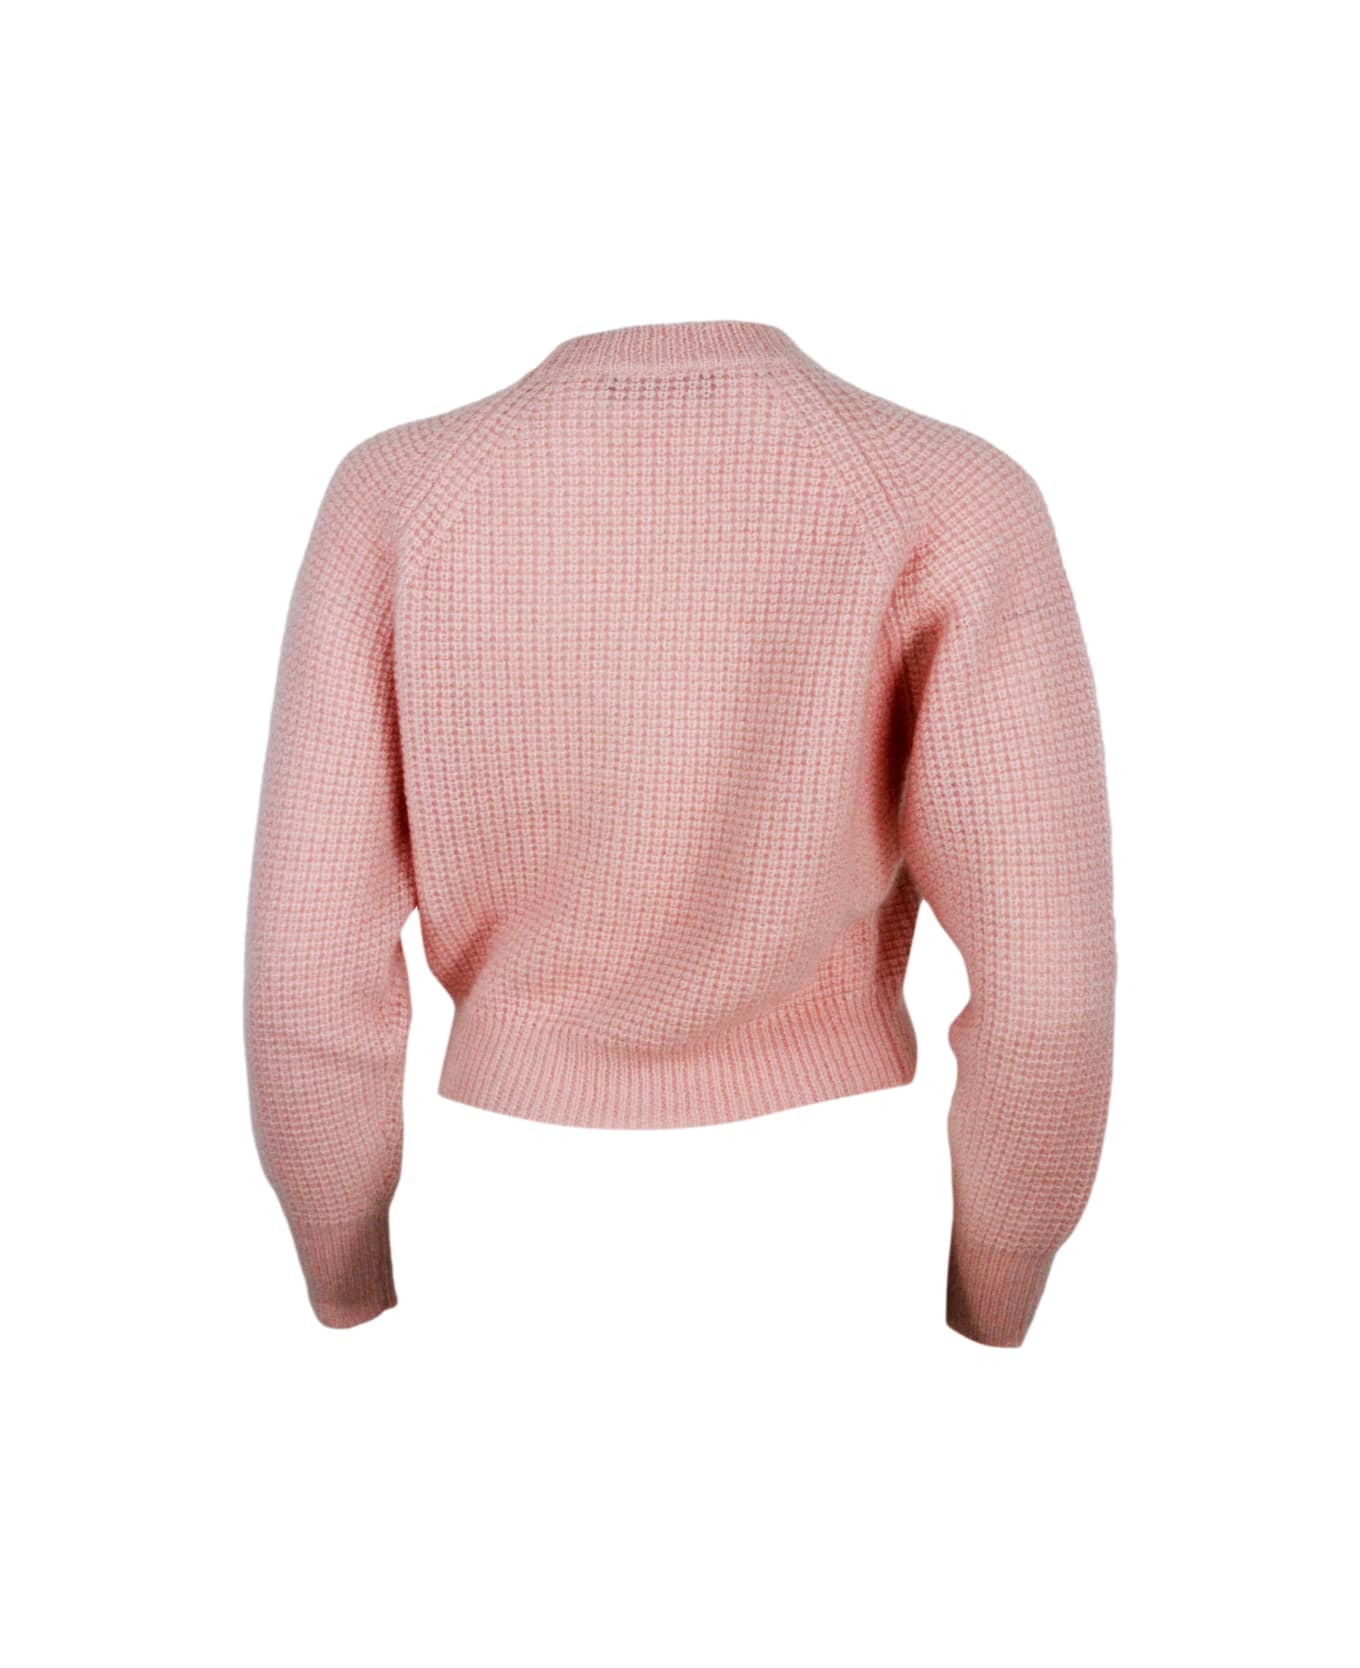 Fabiana Filippi Long-sleeved Crew-neck Sweater In Mohair, Cropped Model With Raglan Sleeves And Diamond Stitch Work - Pink